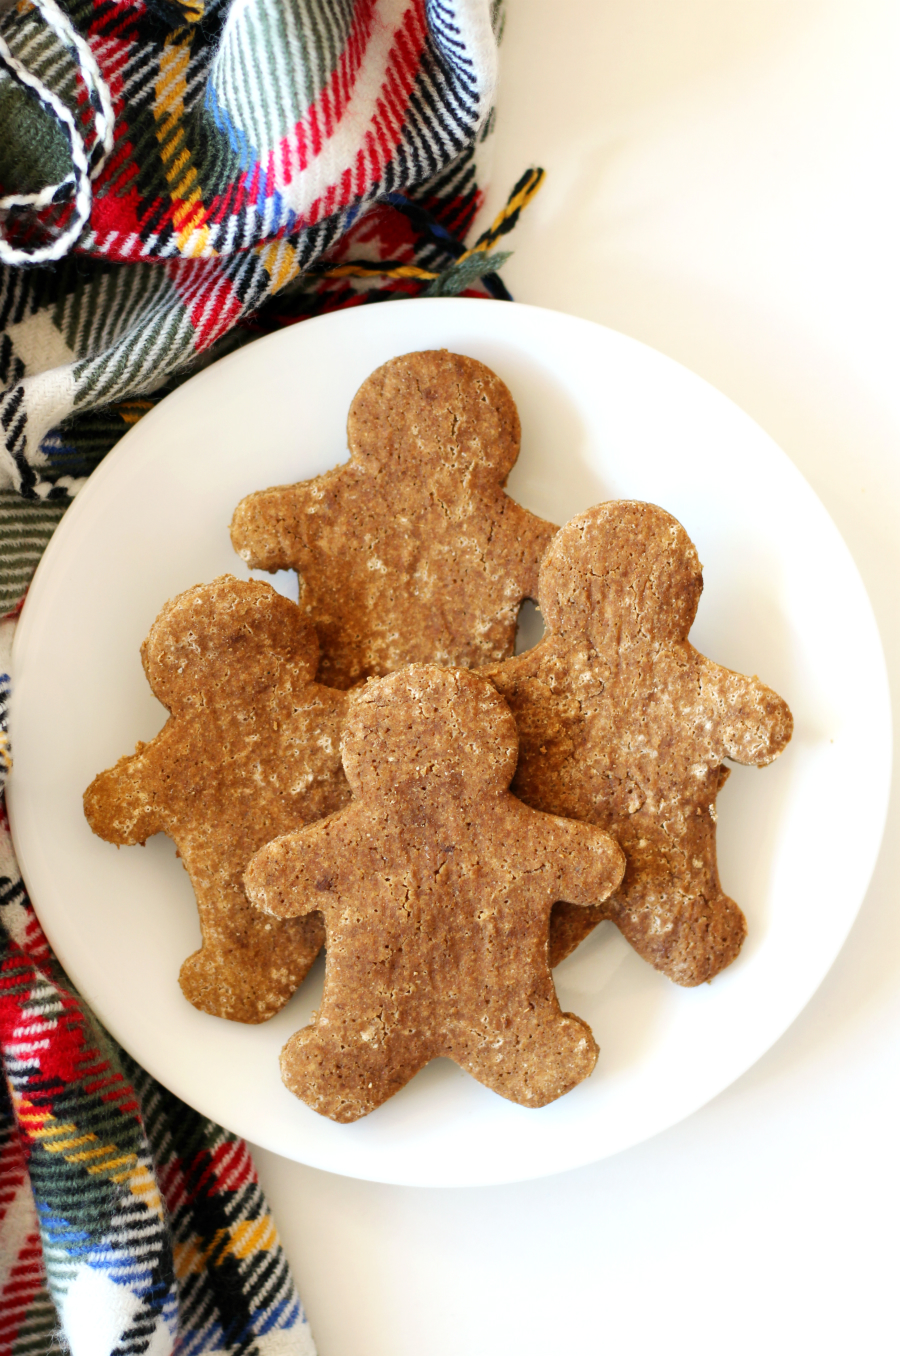 Classic Gluten-Free Gingerbread Cookies (Vegan) | Strength and Sunshine @RebeccaGF666 The holiday season is not complete without Gingerbread Cookies! These classic gluten-free, vegan, and allergy-free gingerbread men (and friends) are such a fun sweet treat for all to have this Christmas. Food allergies don't have to get in the way with this dessert recipe!